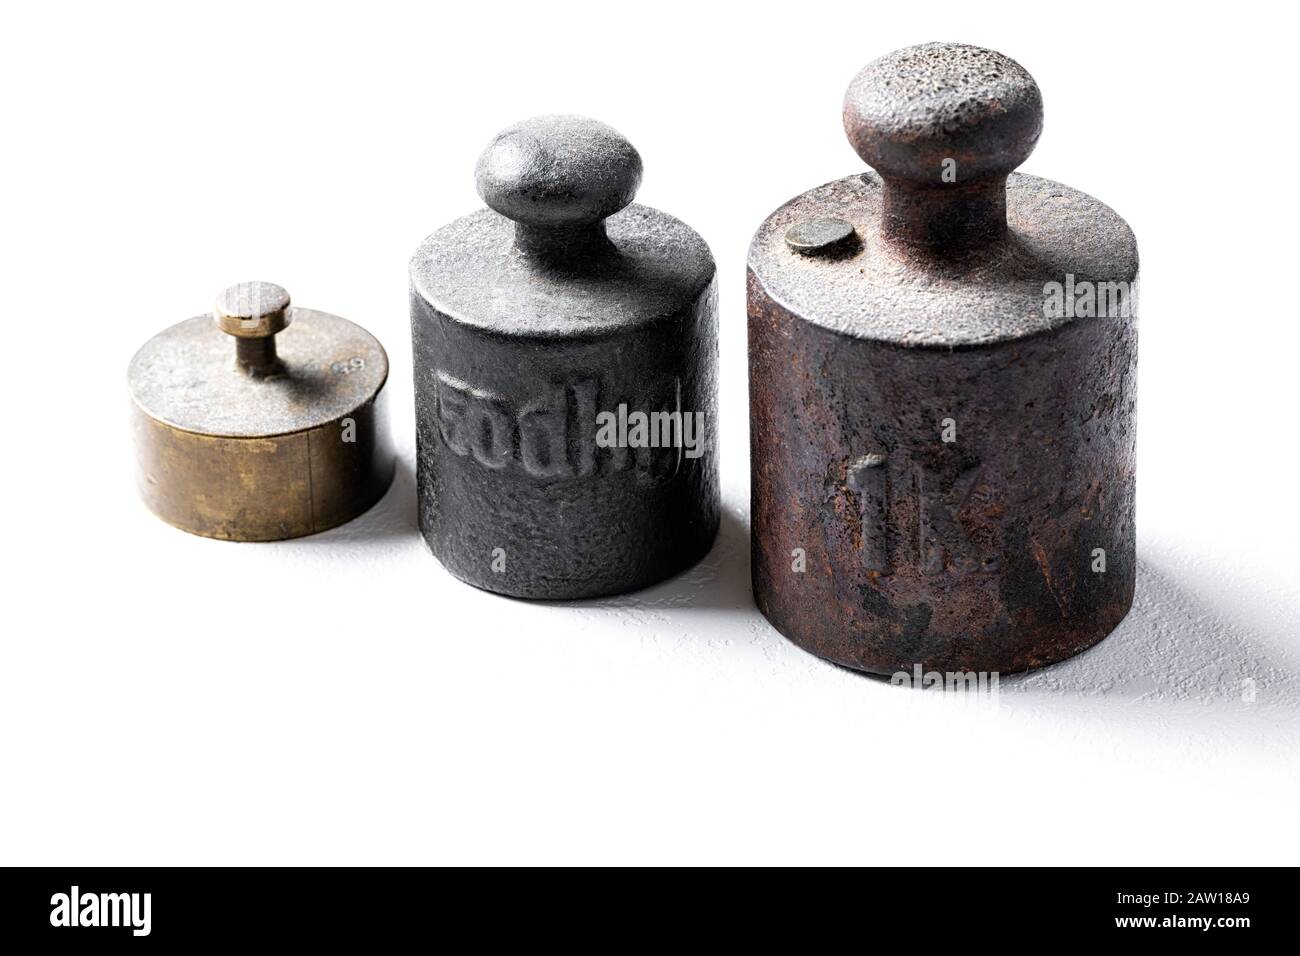 Old rustic metal weights on white background. Stock Photo